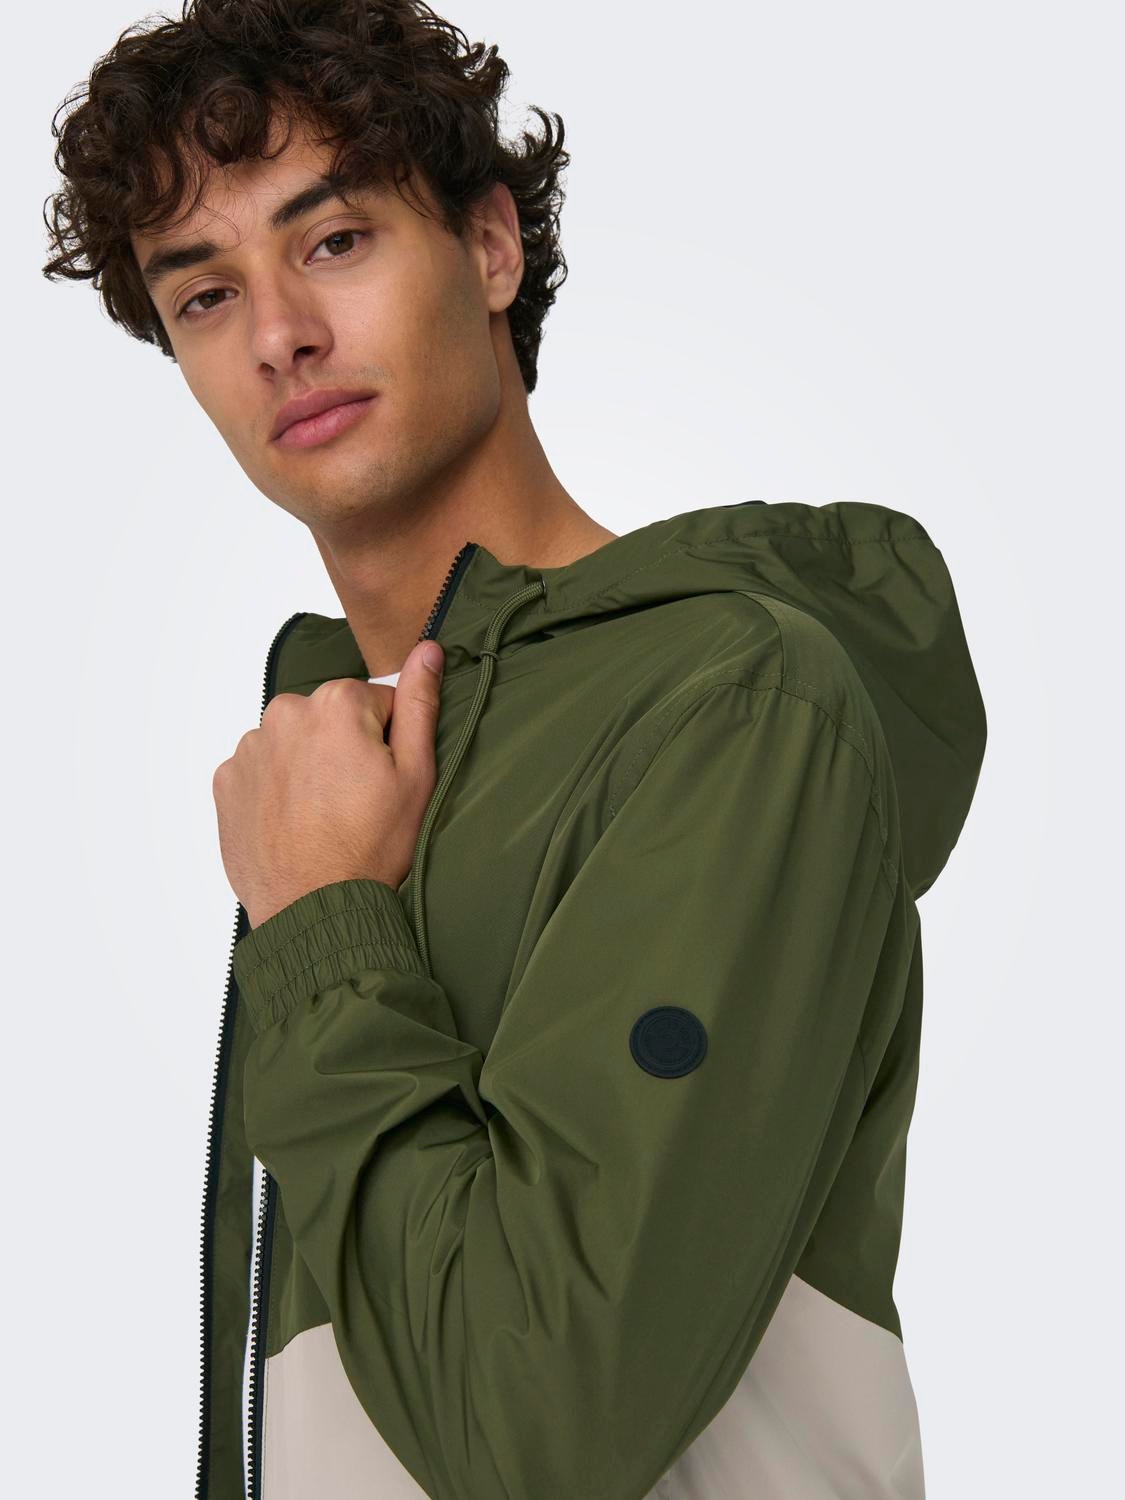 ONLY & SONS Hood Jacket -Olive Night - 22027457